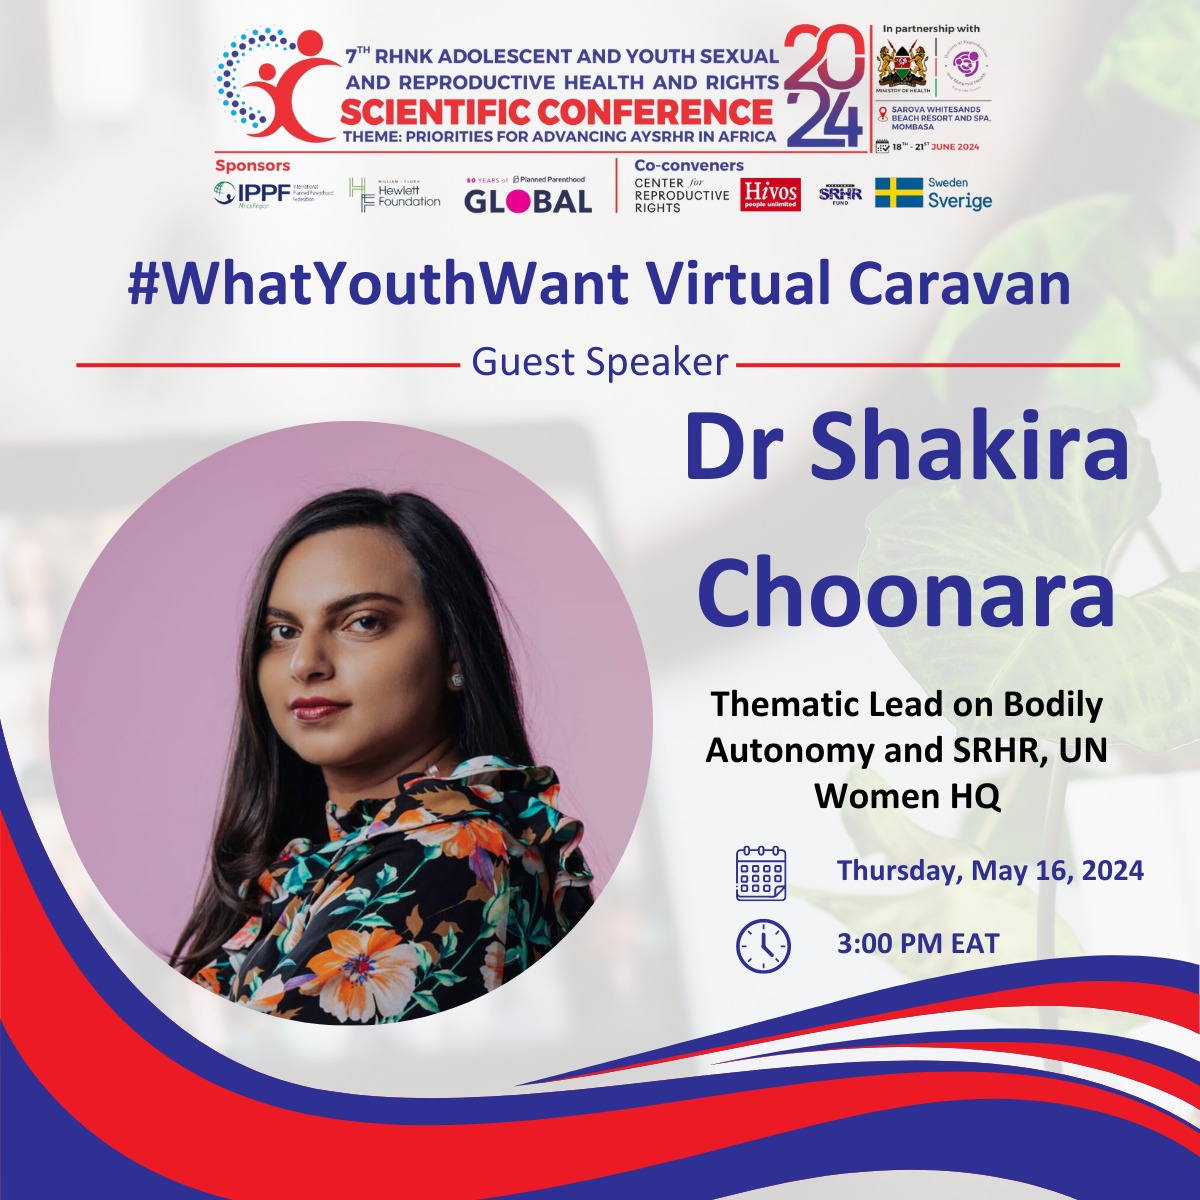 Have you registered for the virtual caravan!! Do it now!! Don't miss the opportunity to learn from our amazing speakers!! As #RHNKconference2024 we got you SRHR needs covered.. Register below us02web.zoom.us/meeting/regist…